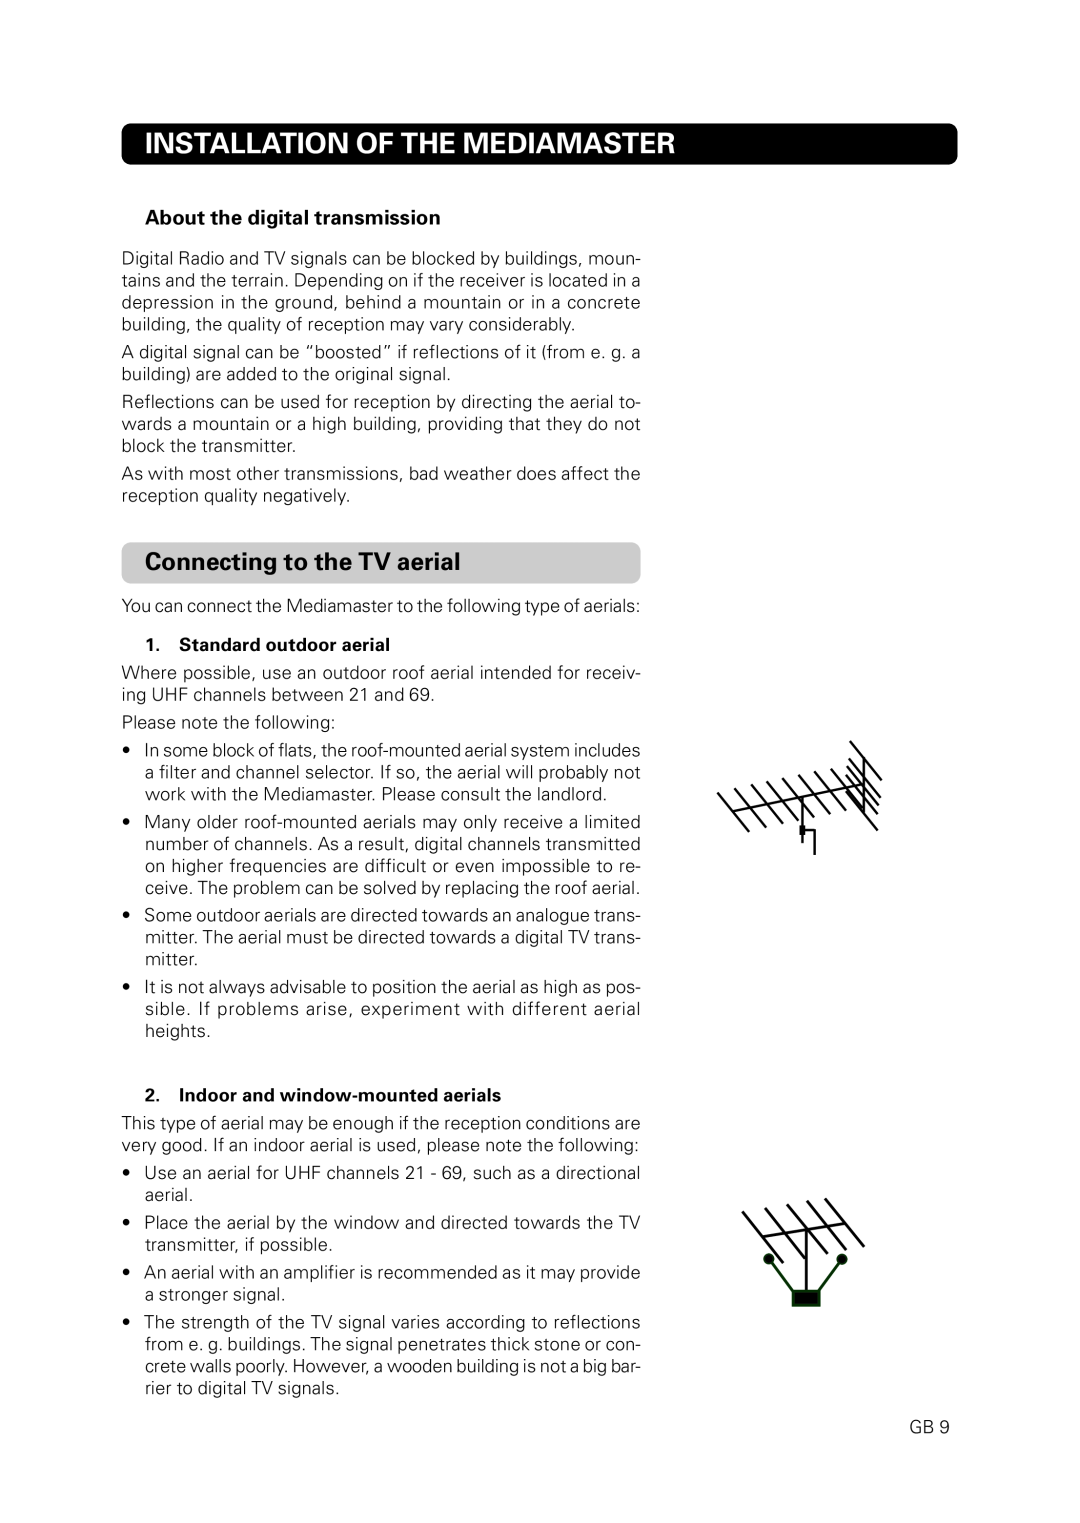 Nokia 9828 owner manual Installation Of The Mediamaster, Connecting to the TV aerial, Standard outdoor aerial 